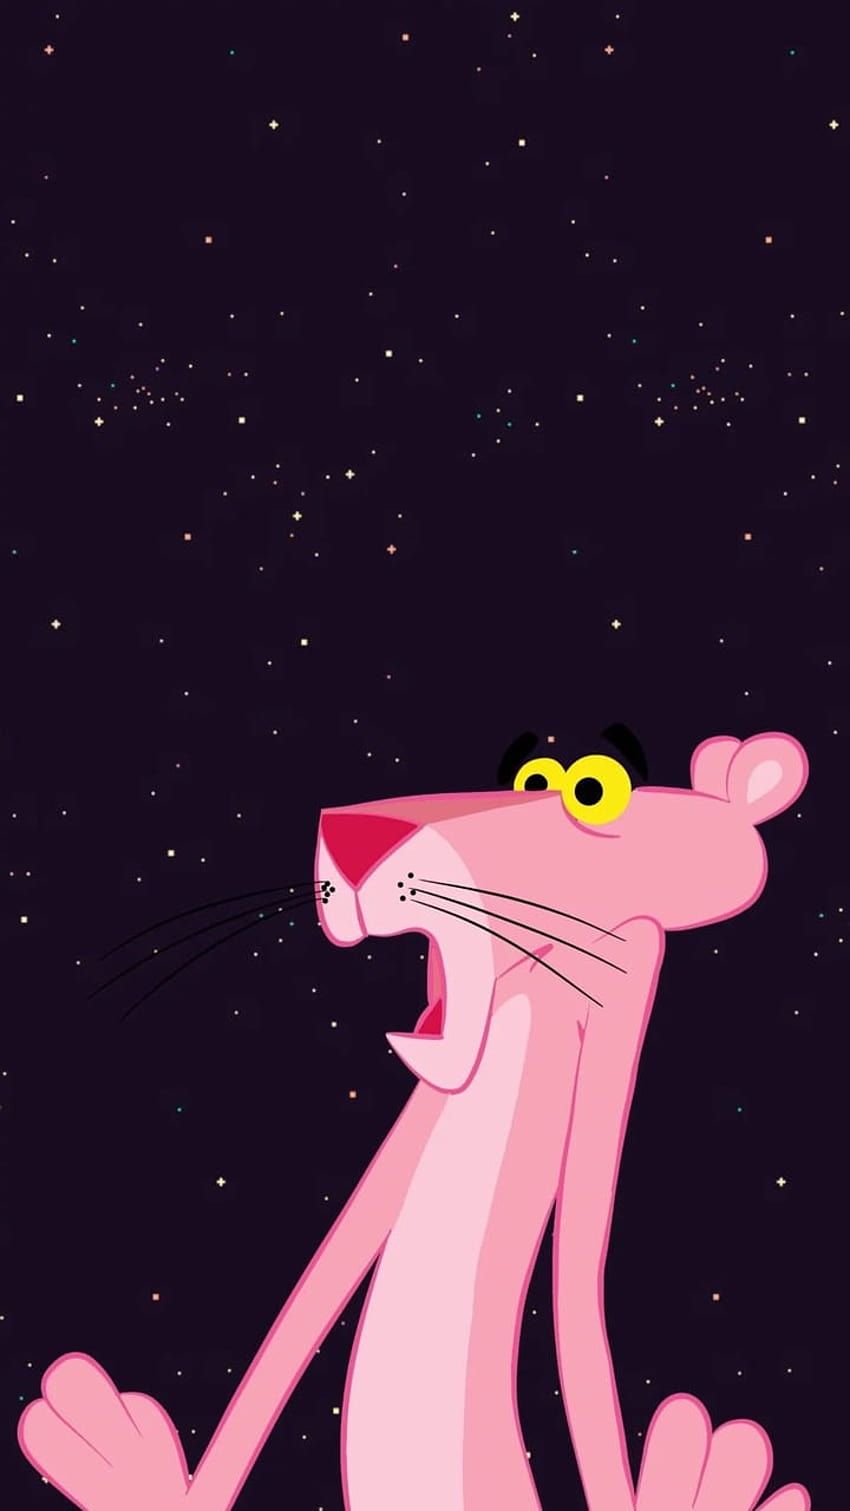 Pink panther wallpaper for your phone - Pink Panther